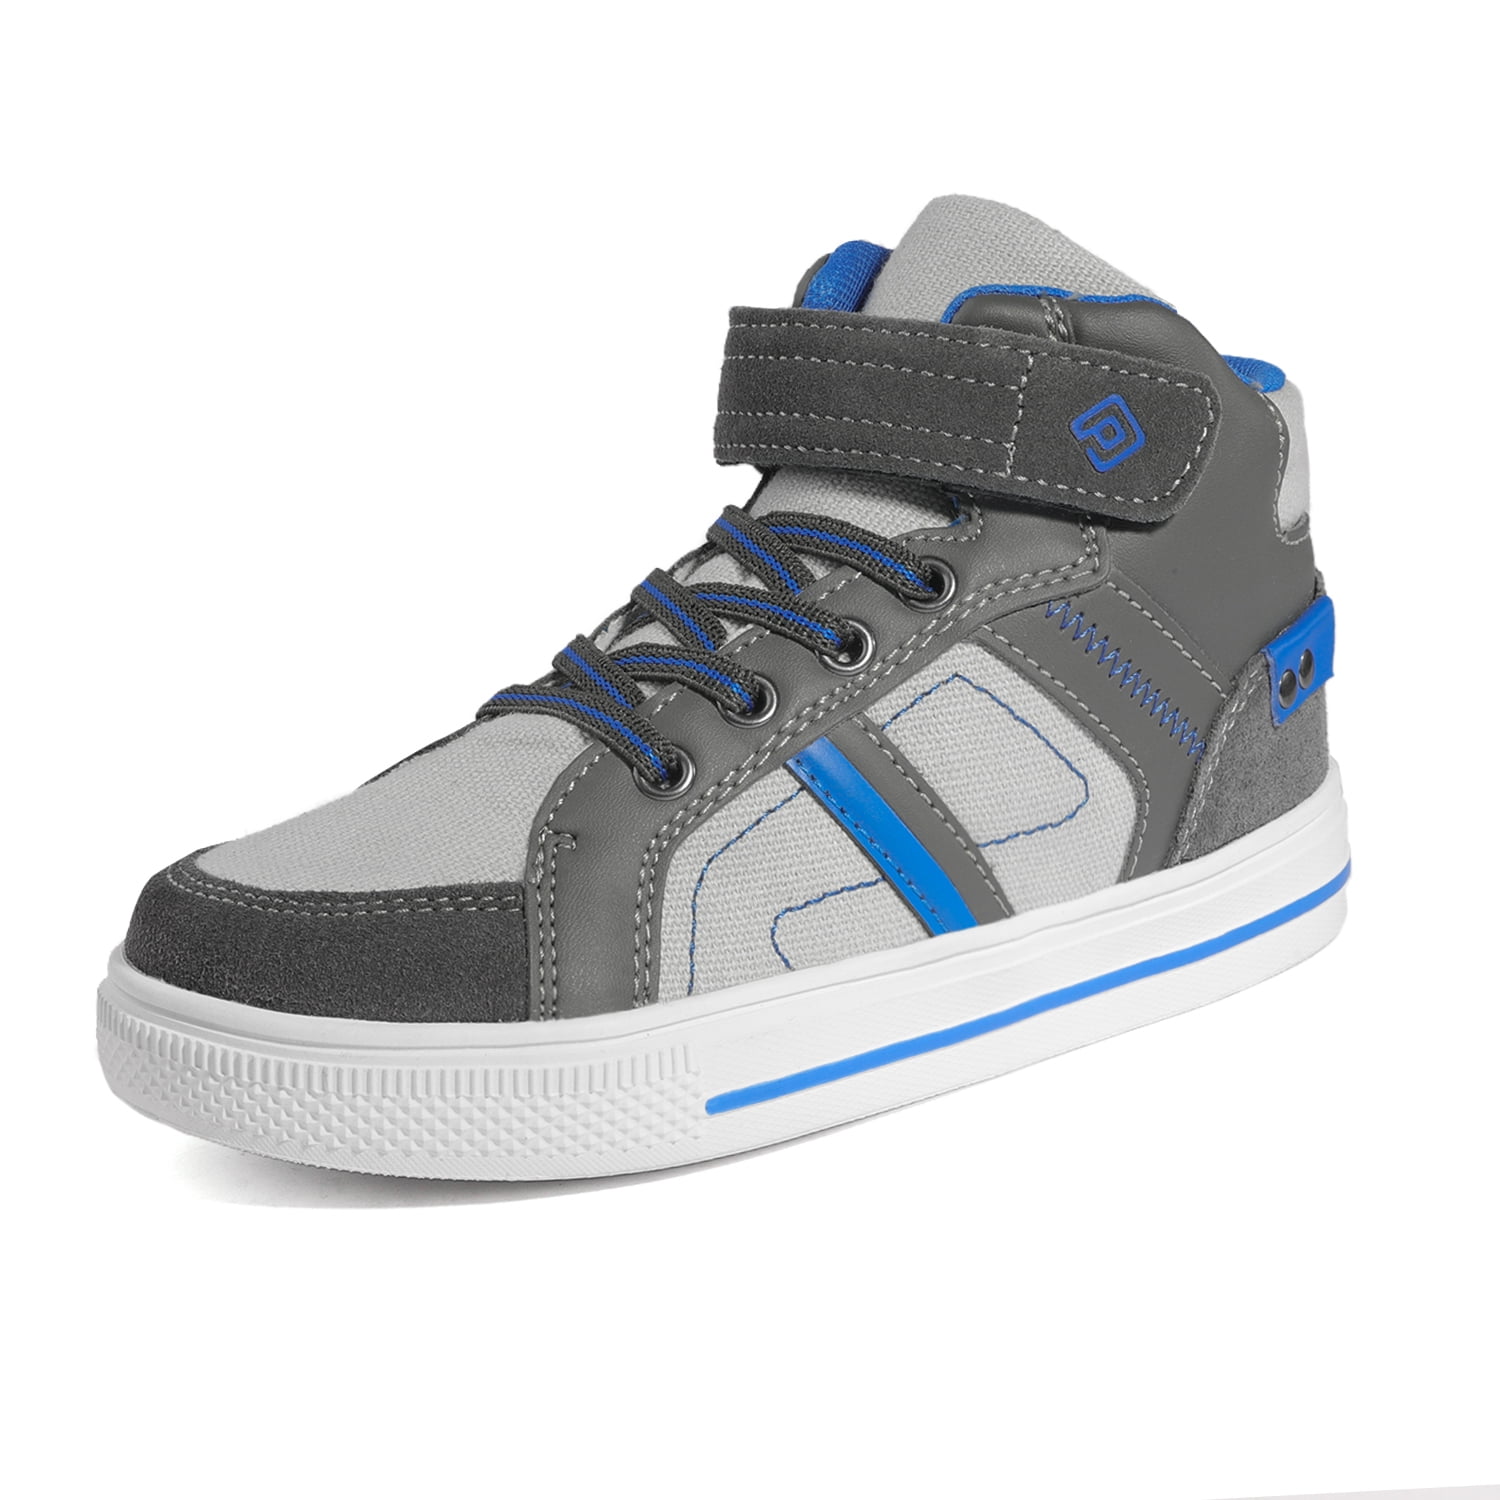 DREAM PAIRS Boys High Top Sneaker Shoes 151014_H GREY/BLUE Size 11 ...